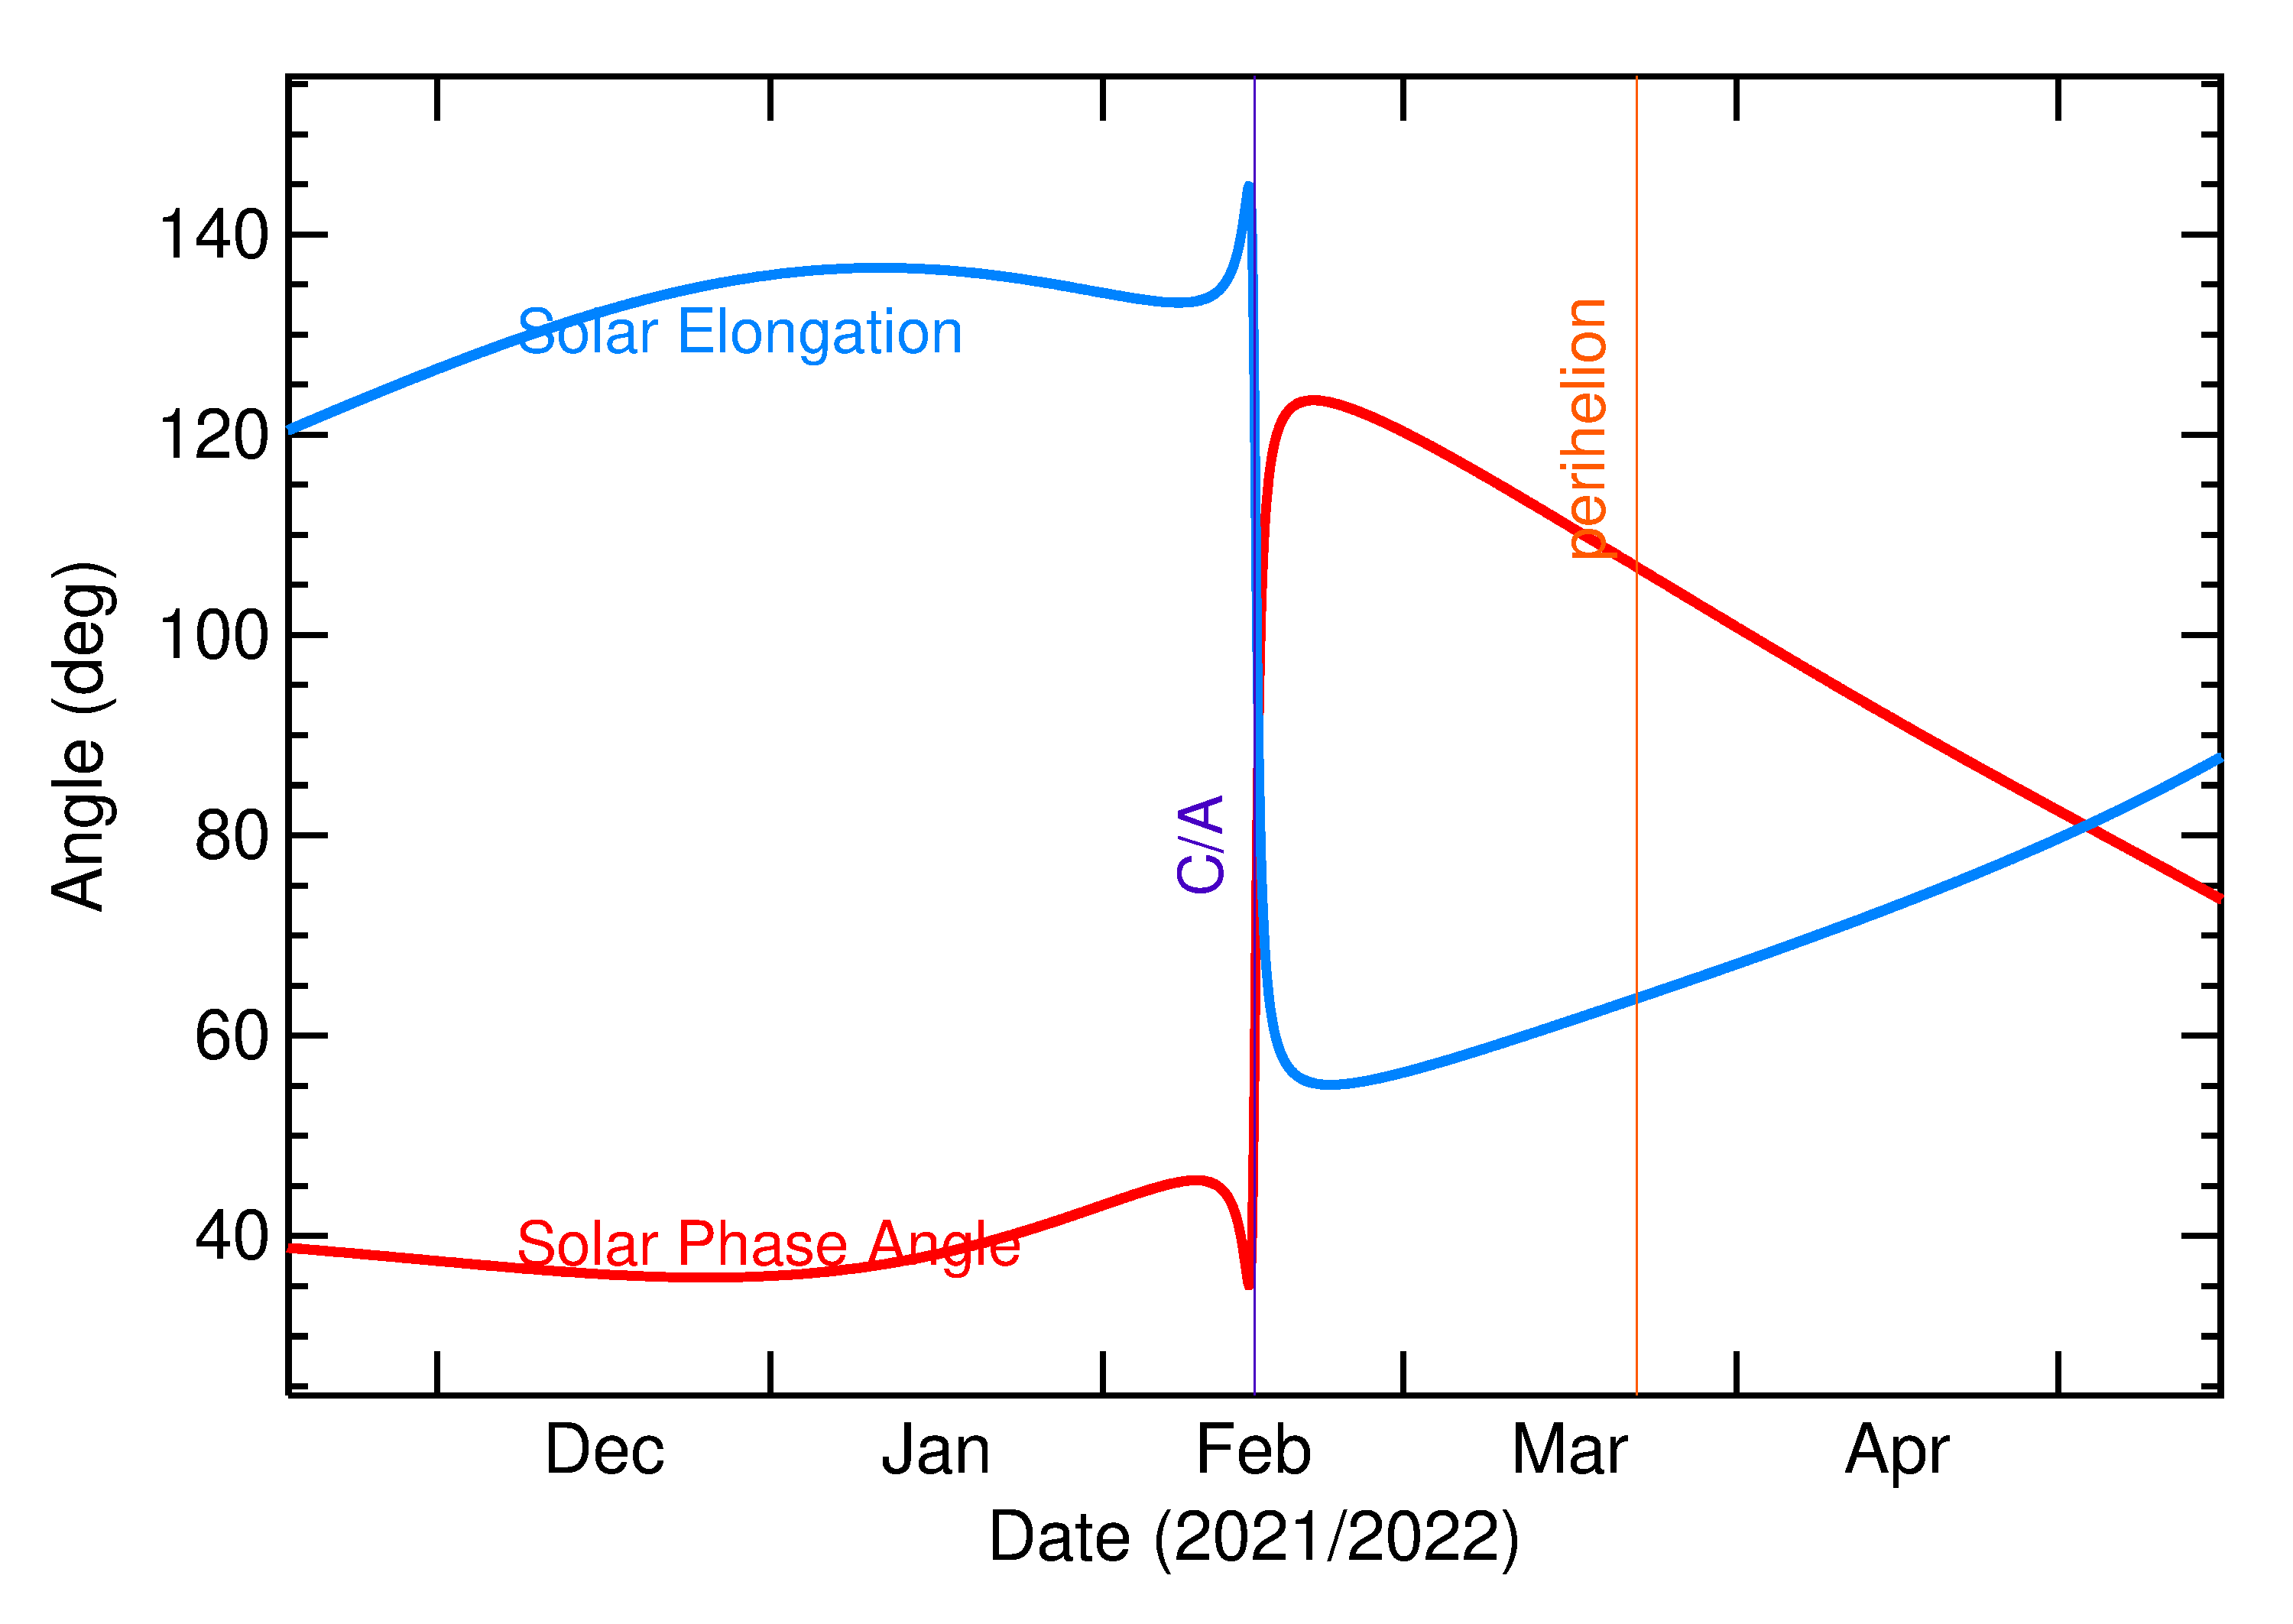 Solar Elongation and Solar Phase Angle of 2022 CF7 in the months around closest approach